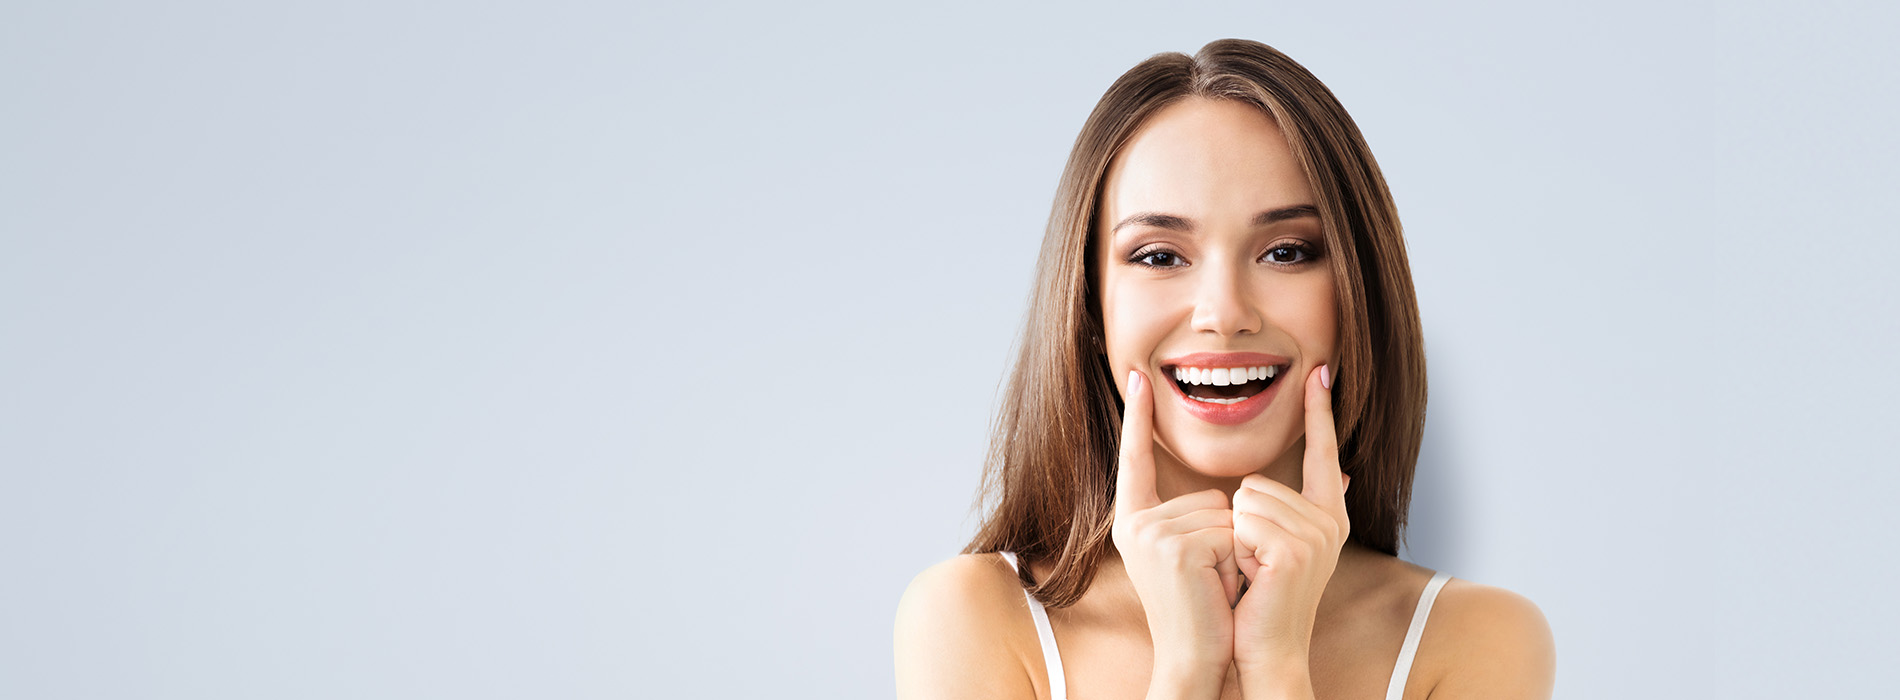 Cosmetic Dentist Smile Gallery in Whiteland